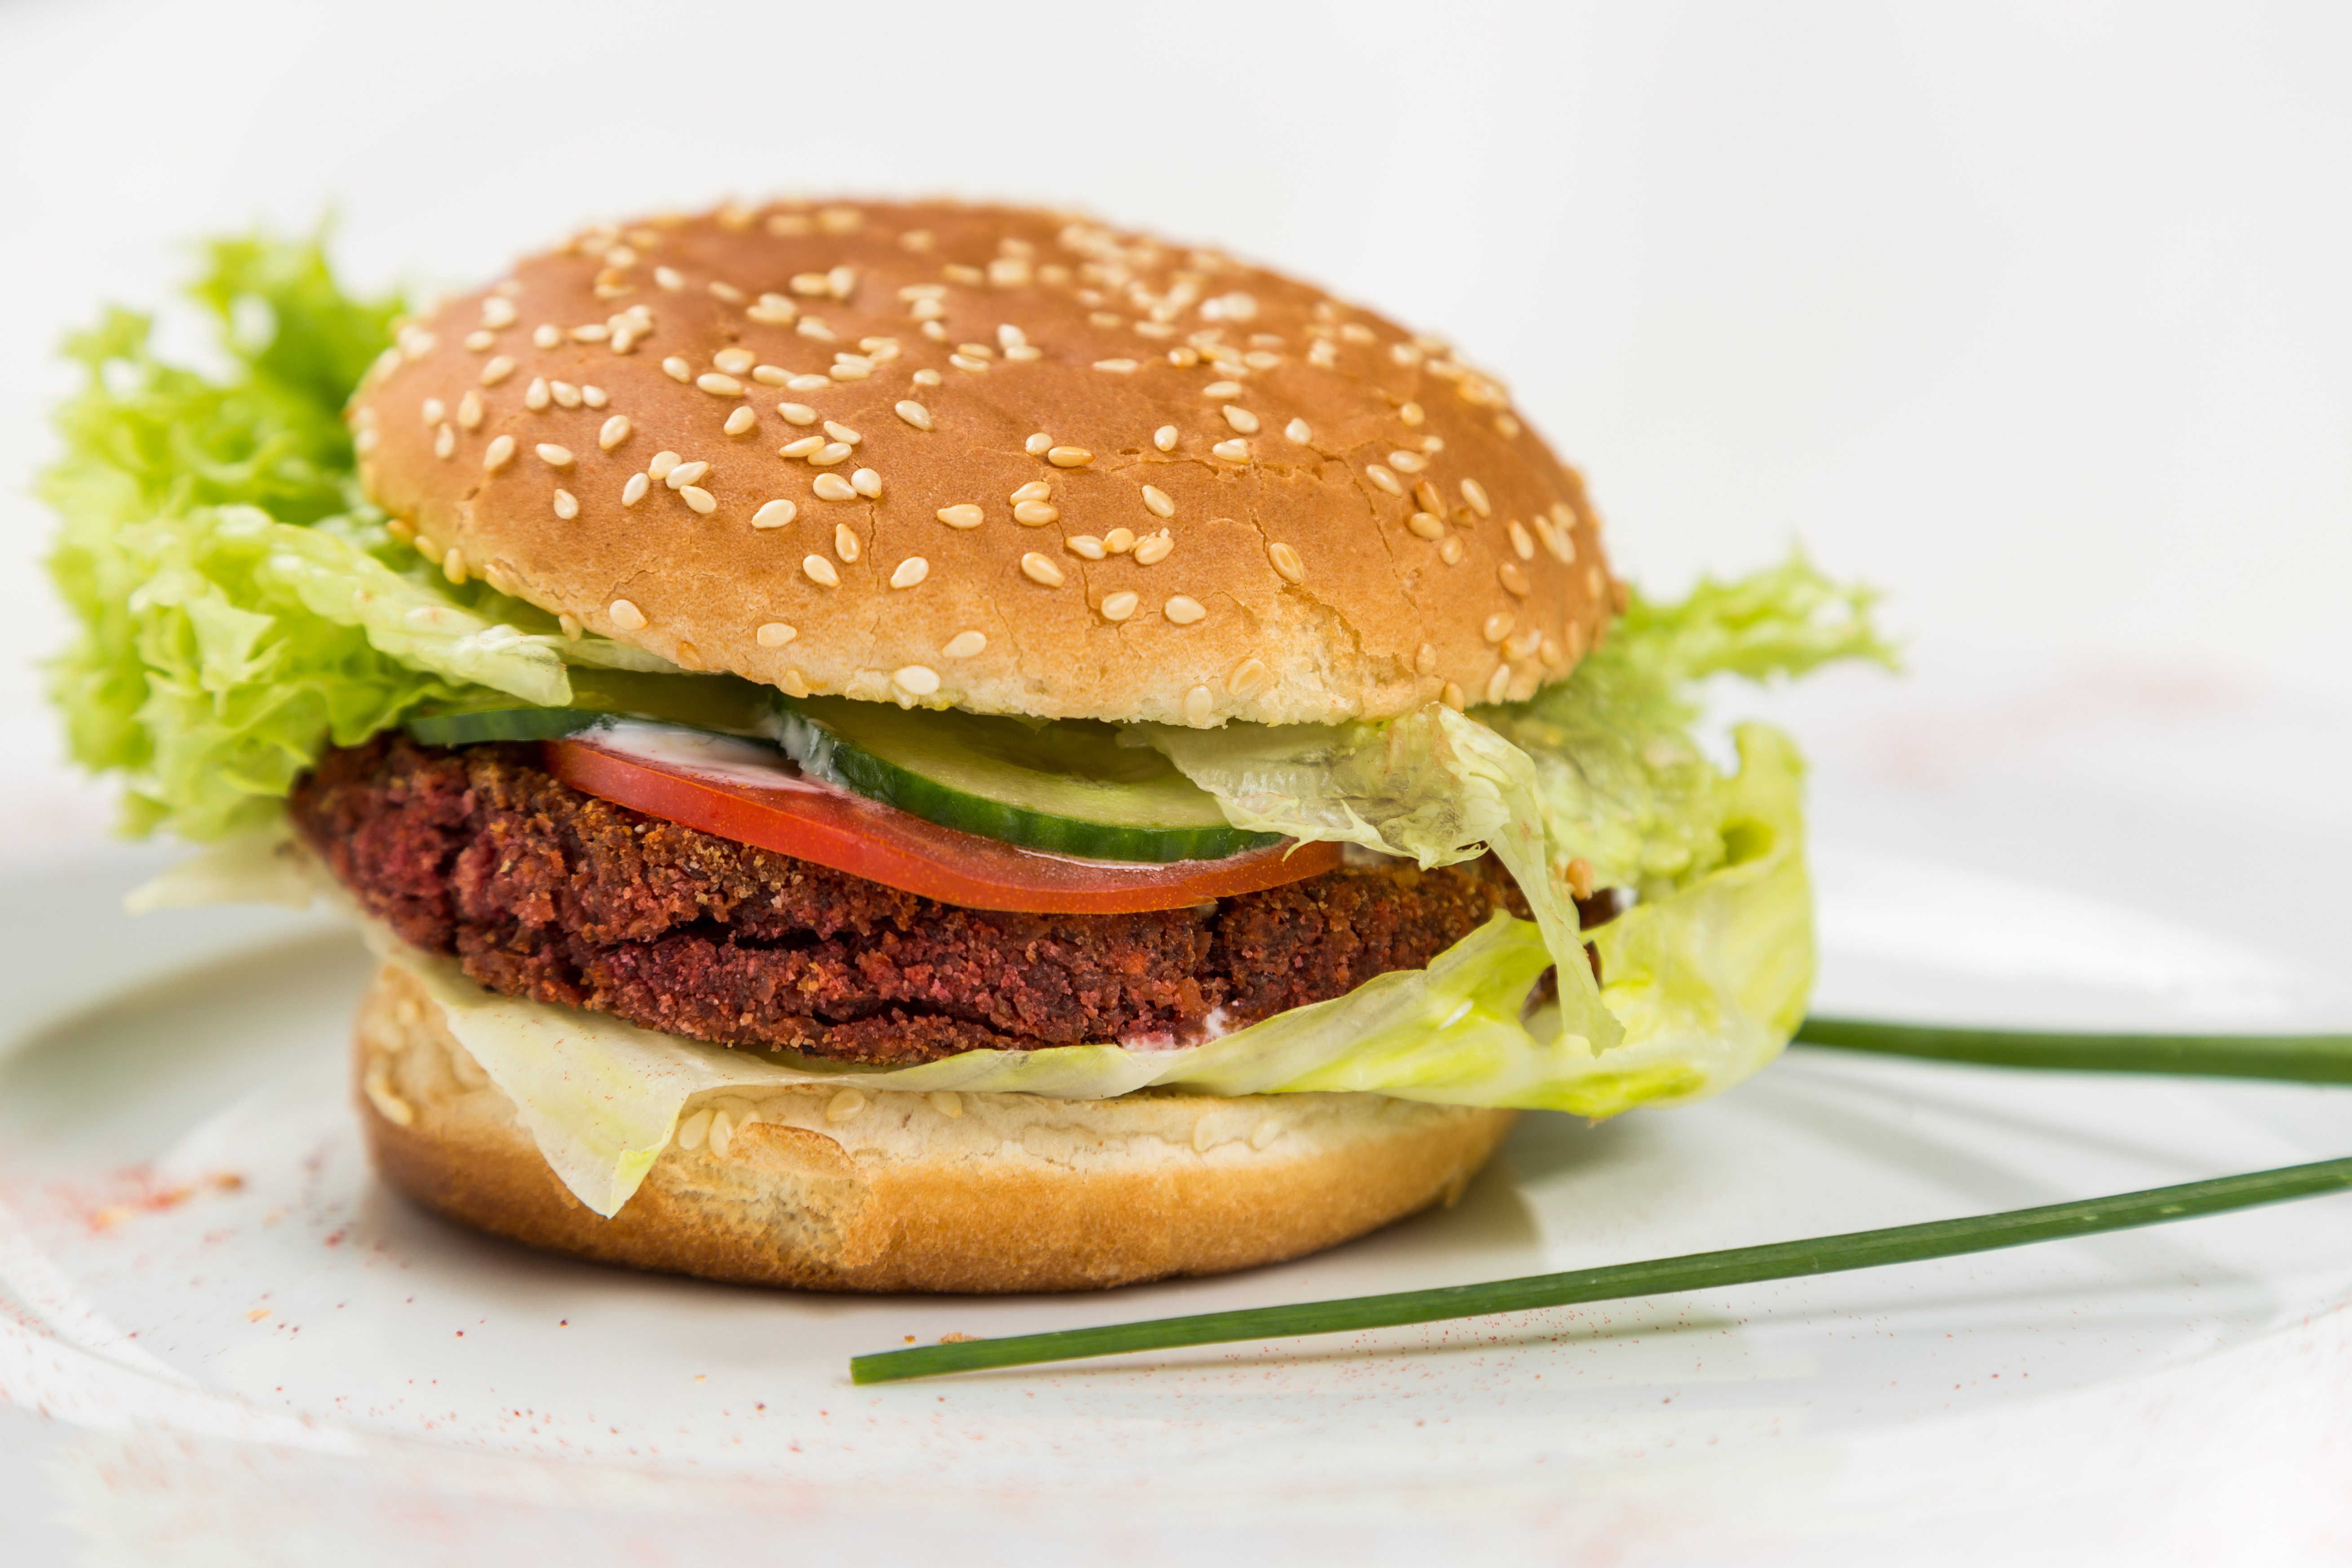 Vegetarian Burger With Vegetables And Cutlet